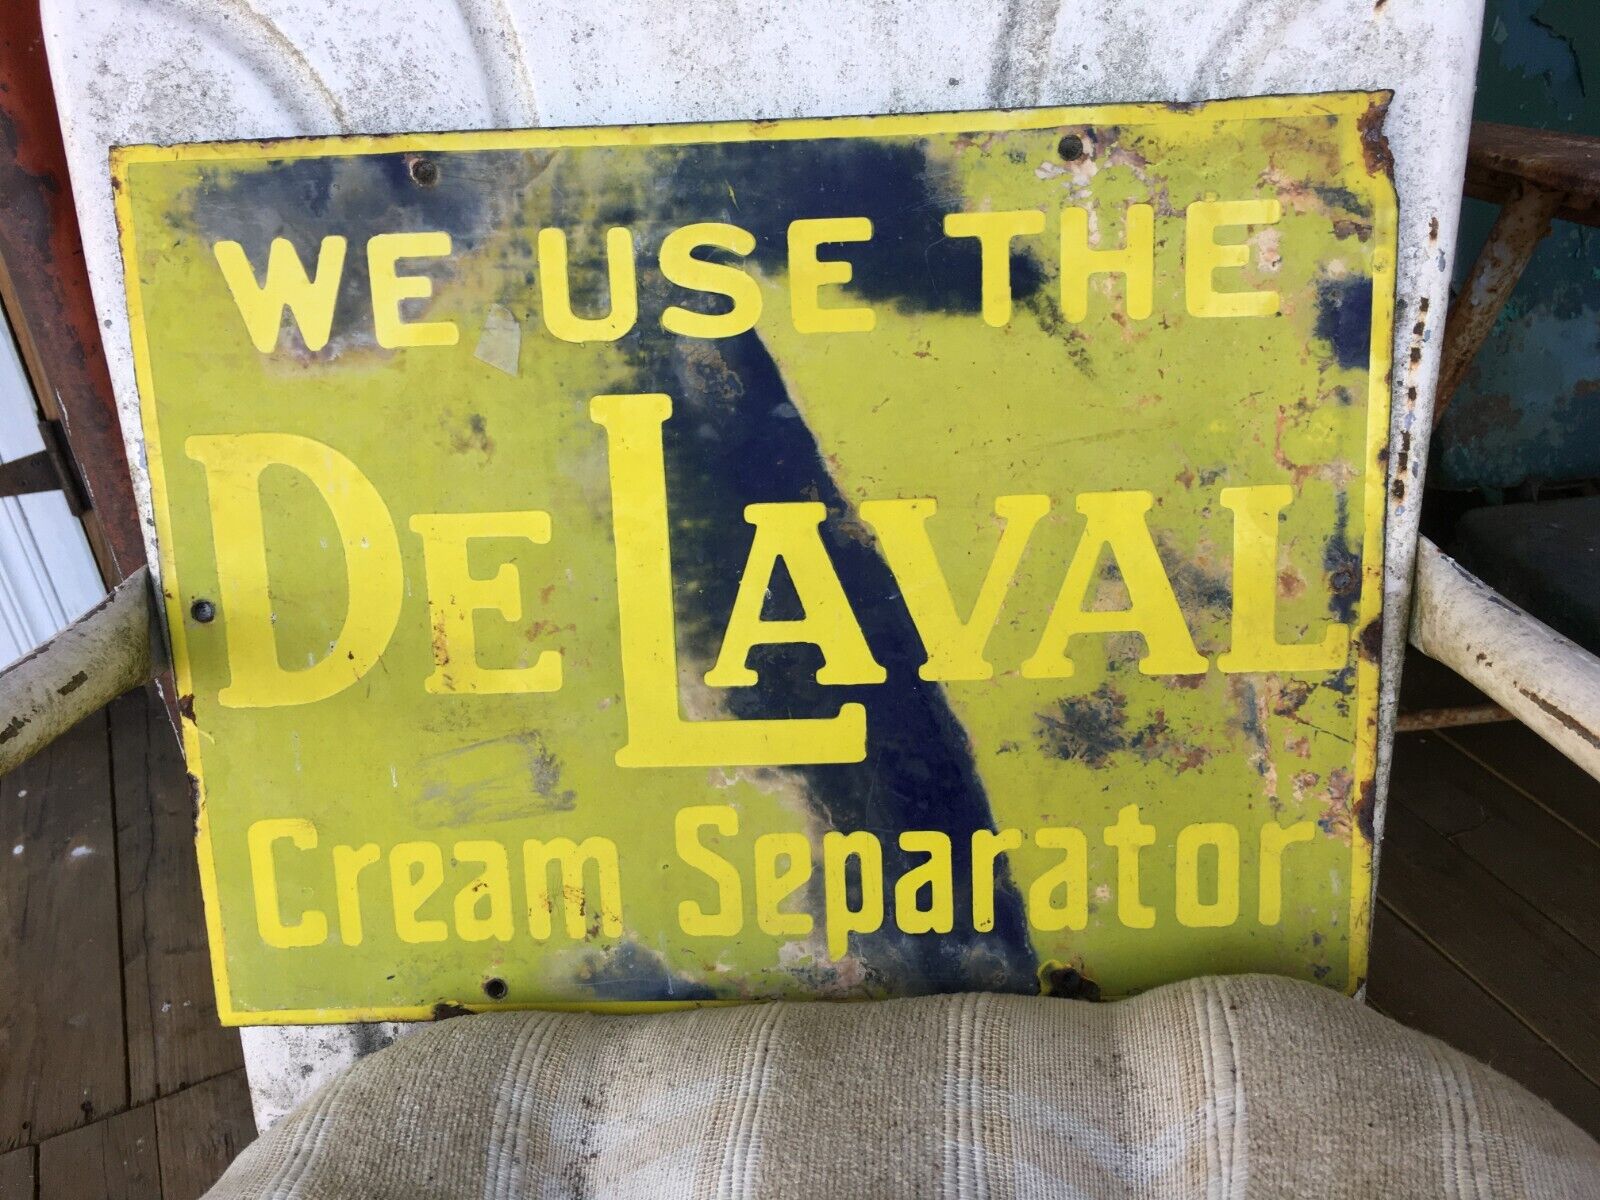 DeLaval Cream Separator Sign made of metal. Advertising sign 12in x 16in